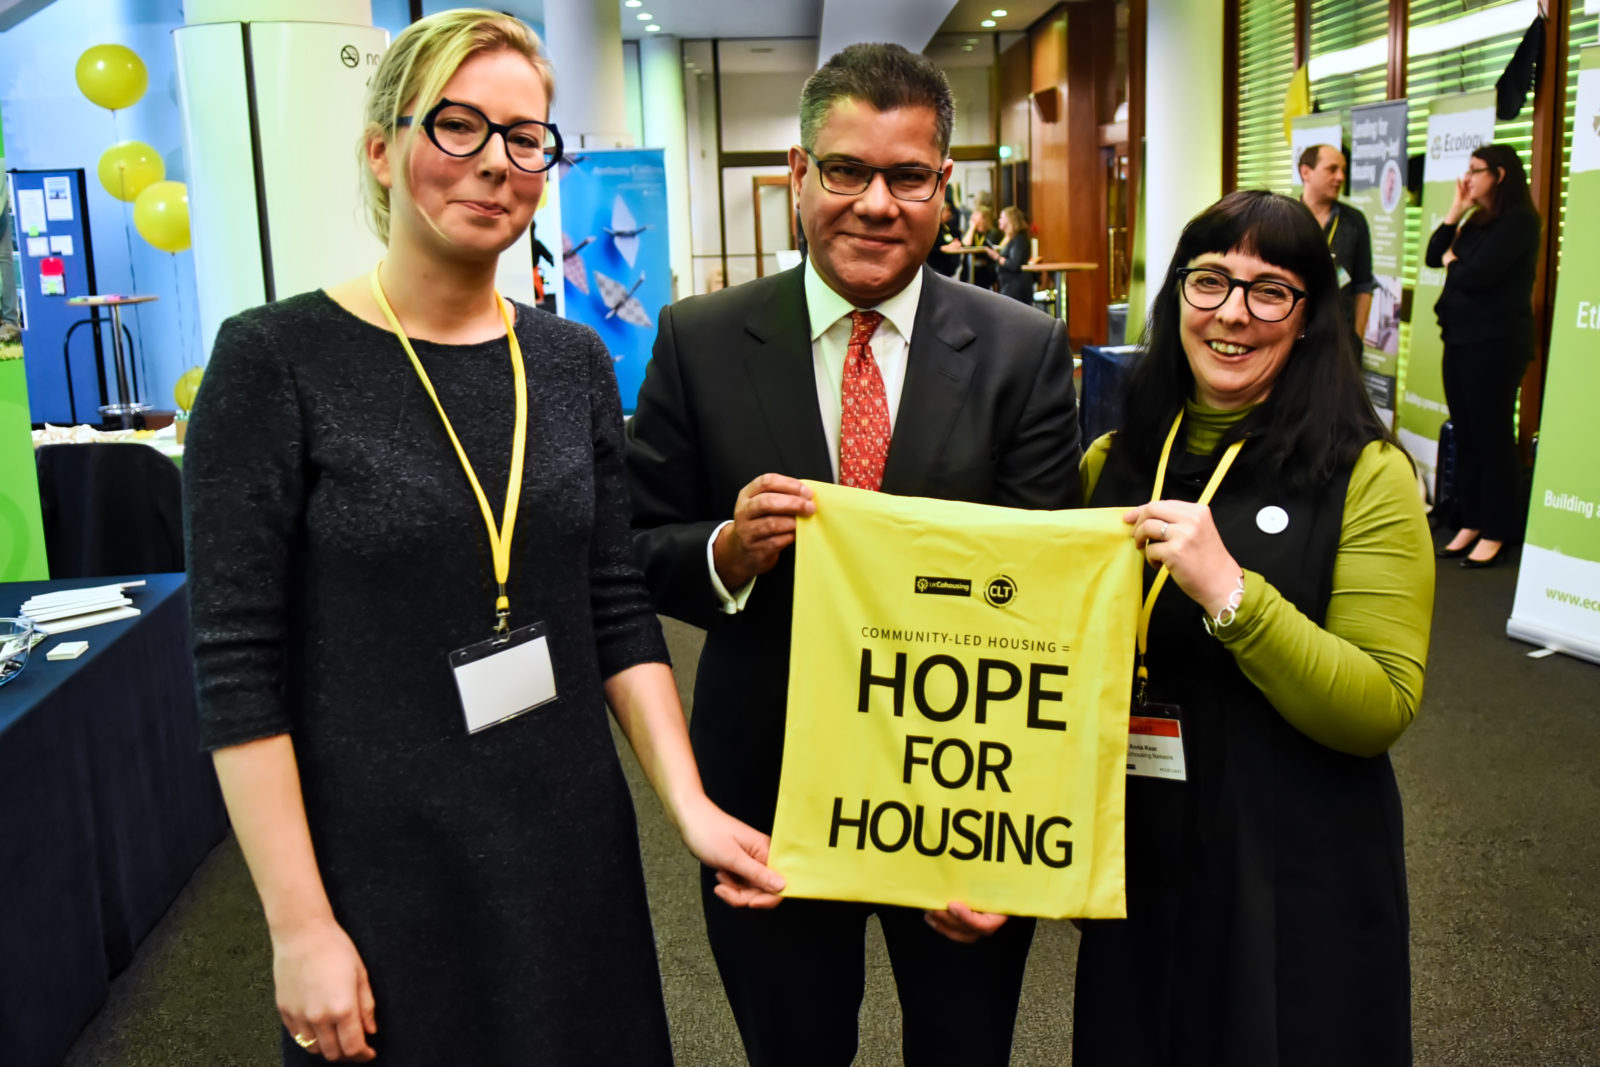 Housing Minister attends first-ever National Community-Led Housing Conference